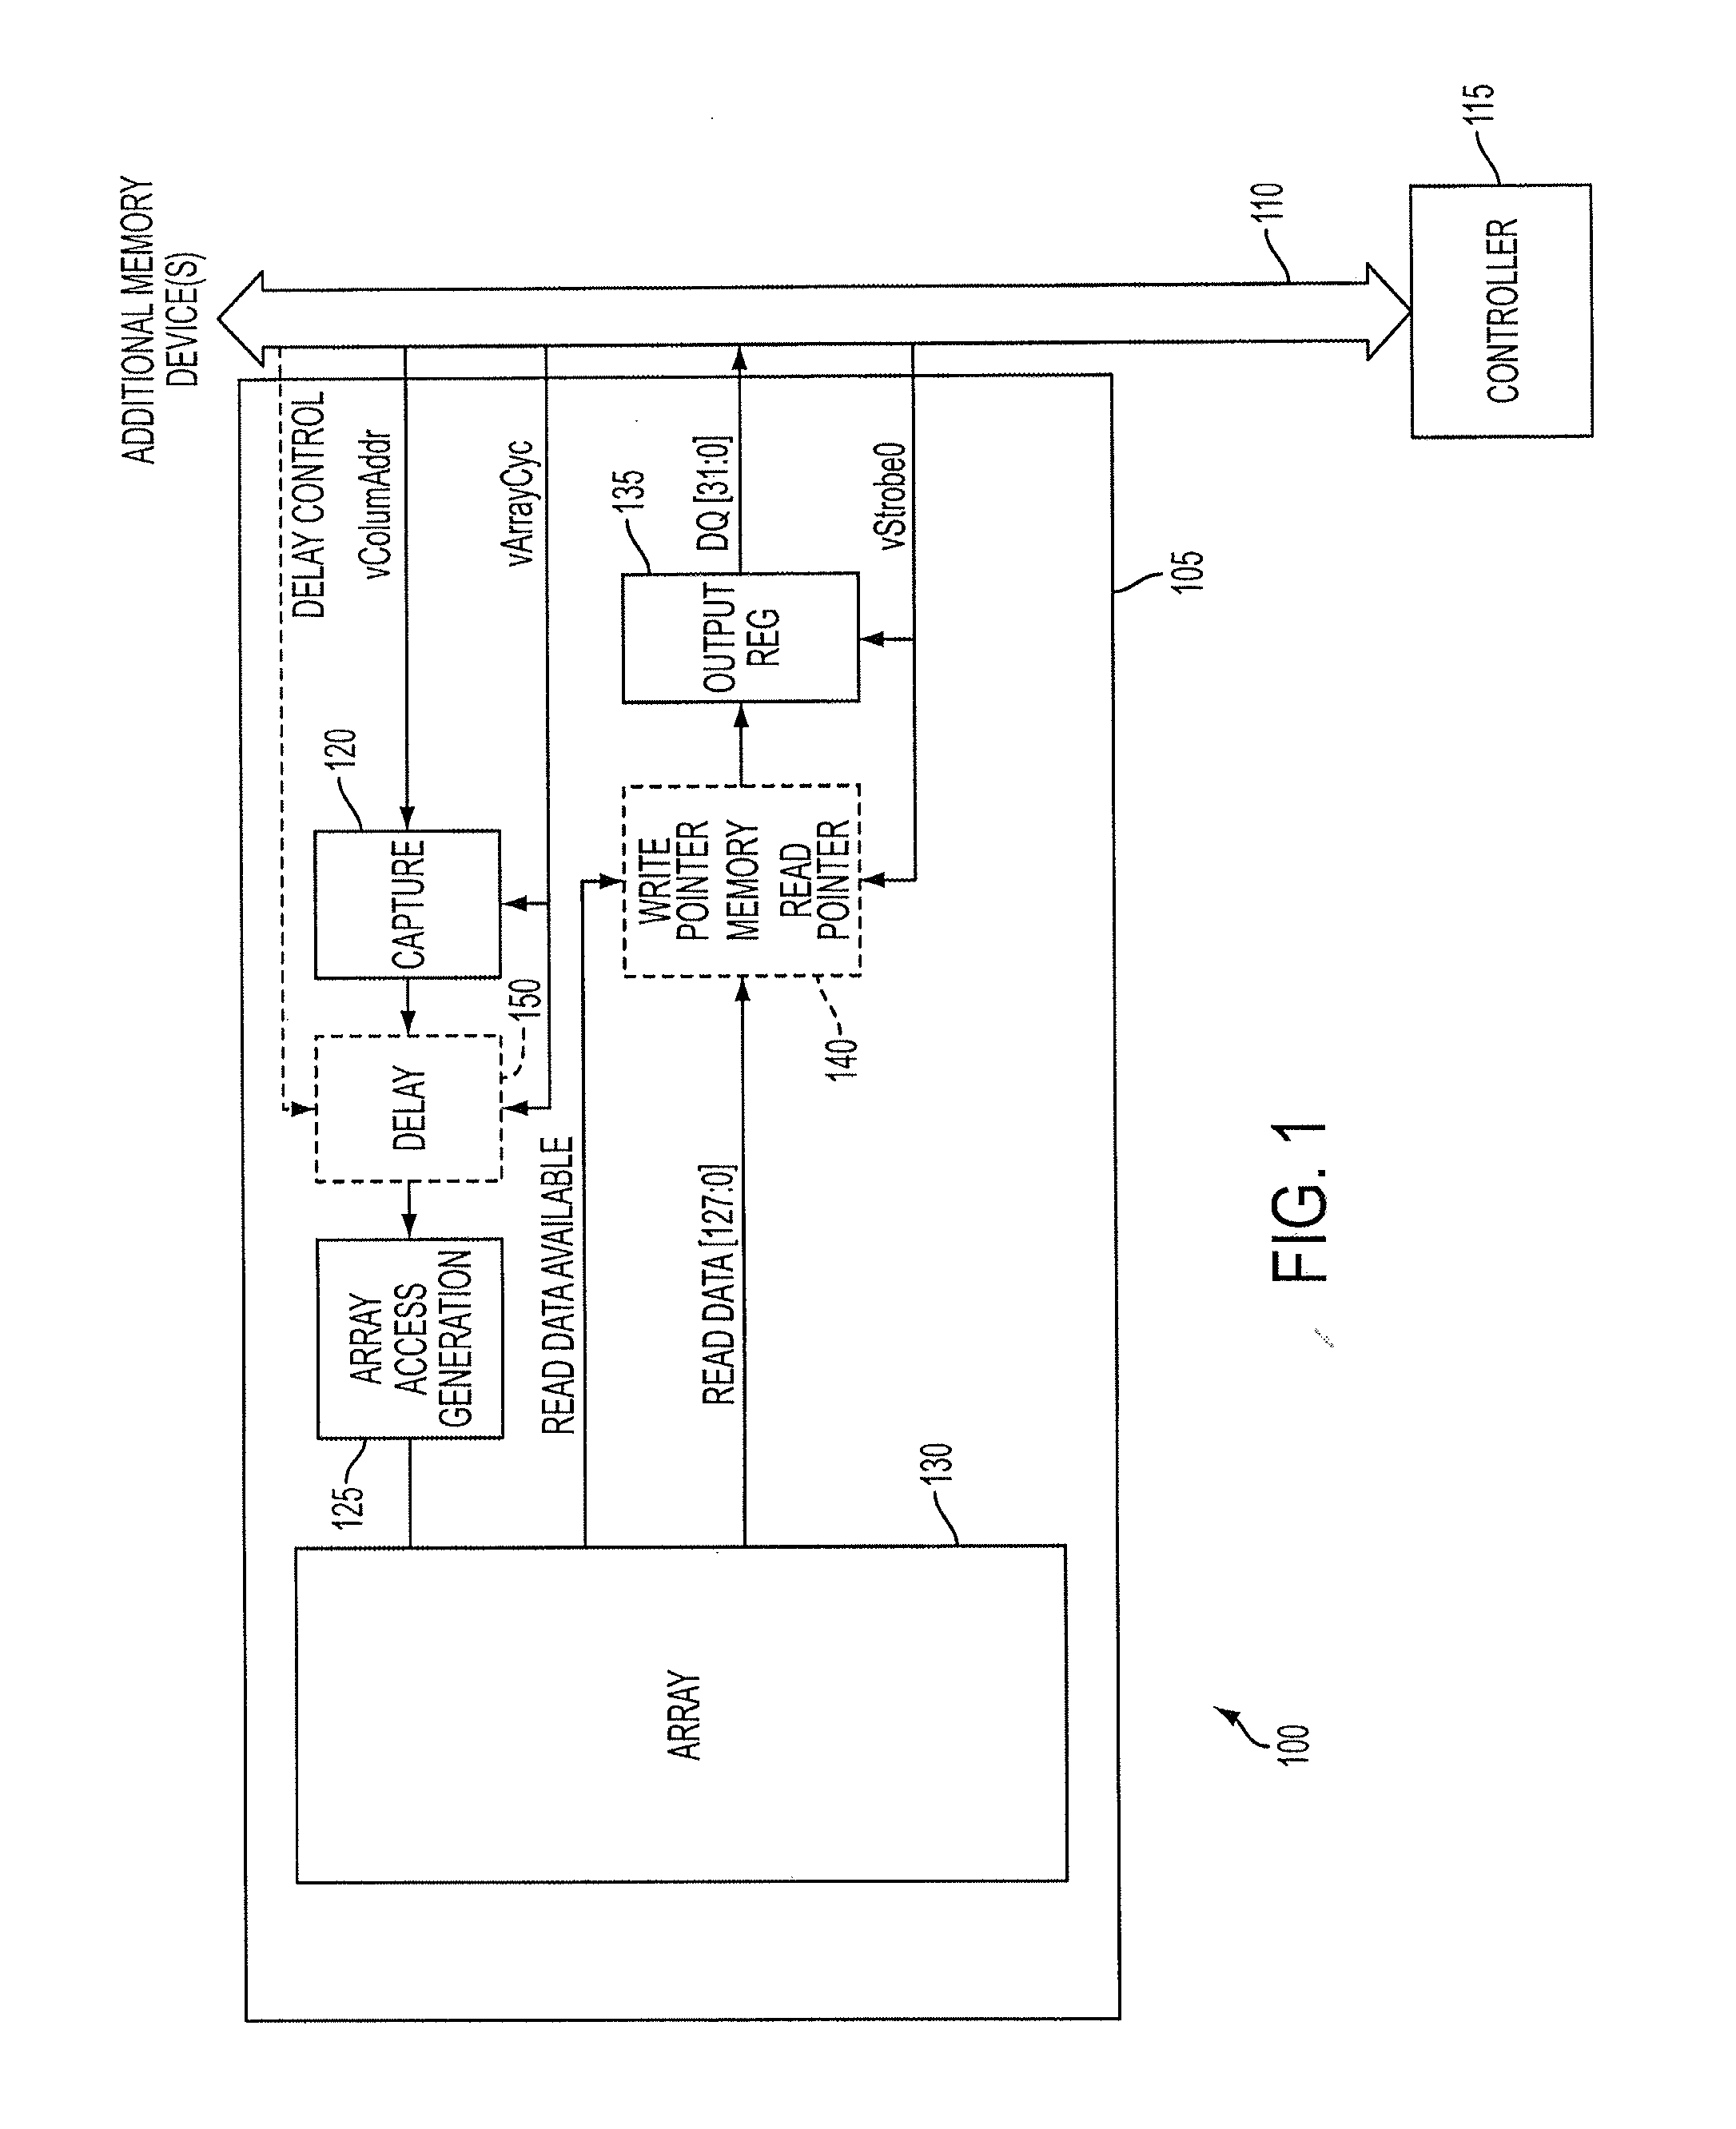 Memory systems and methods for controlling the timing of receiving read data